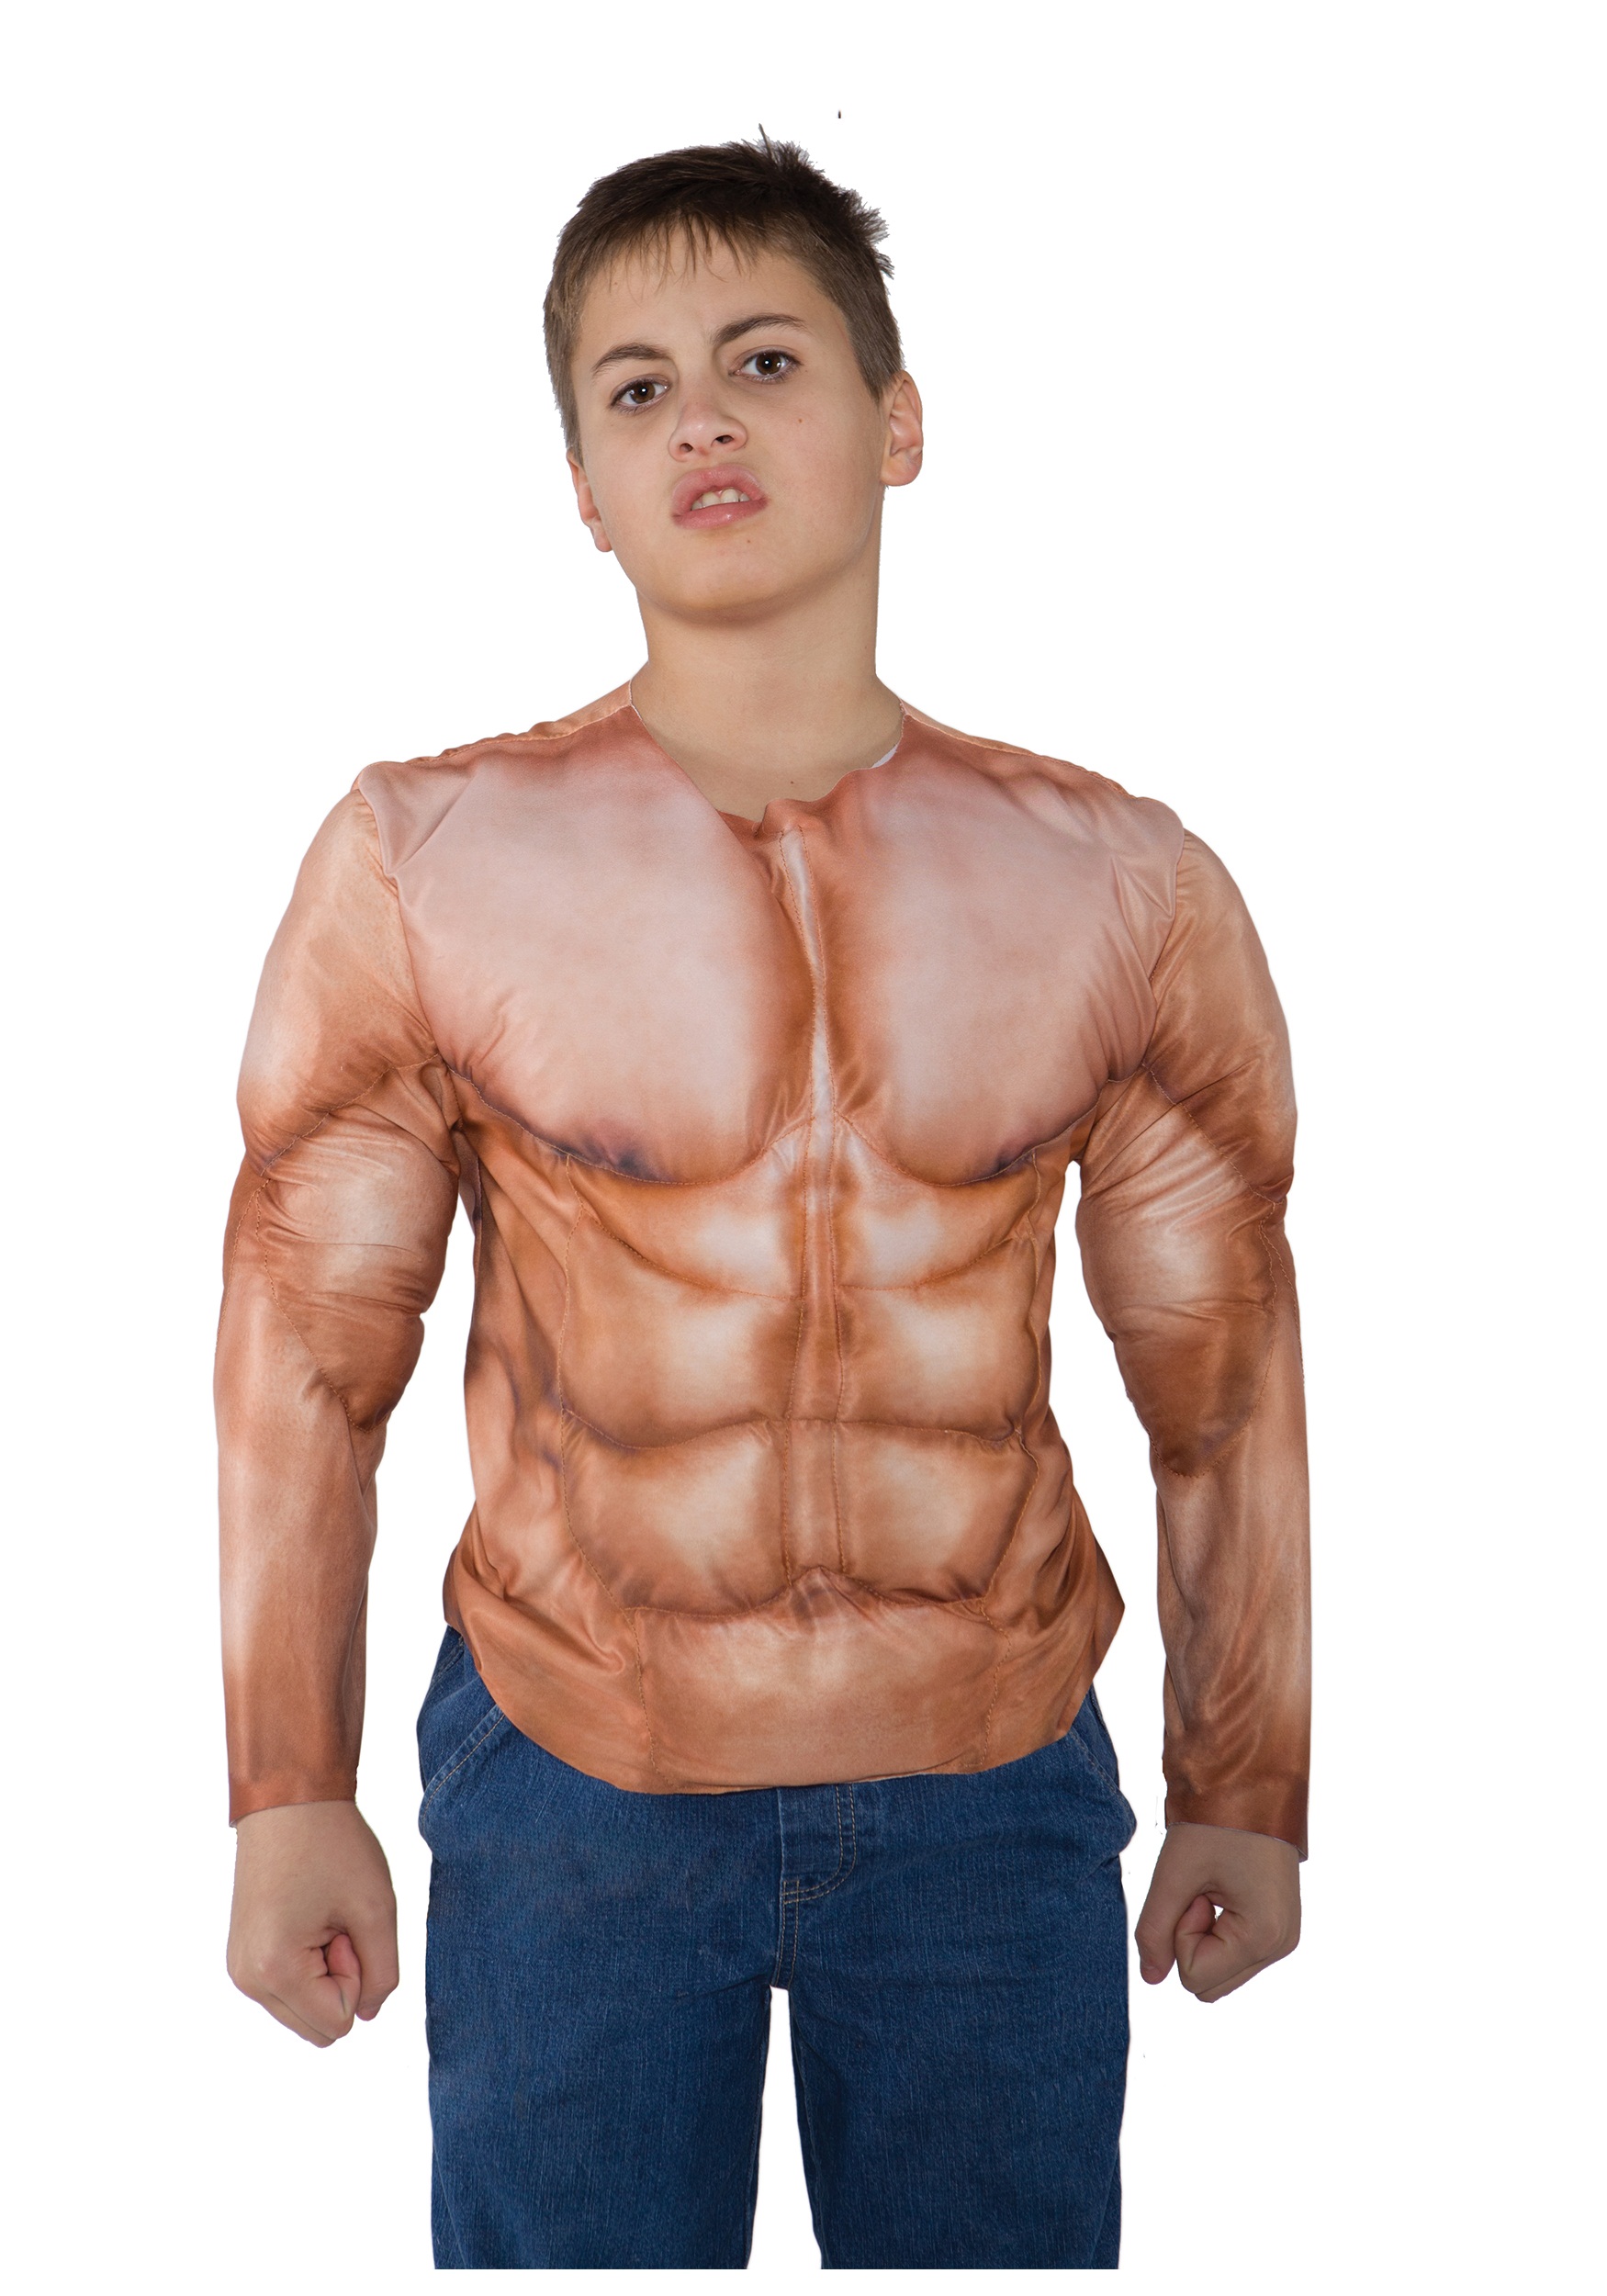 Padded Muscle Kid’s Shirt